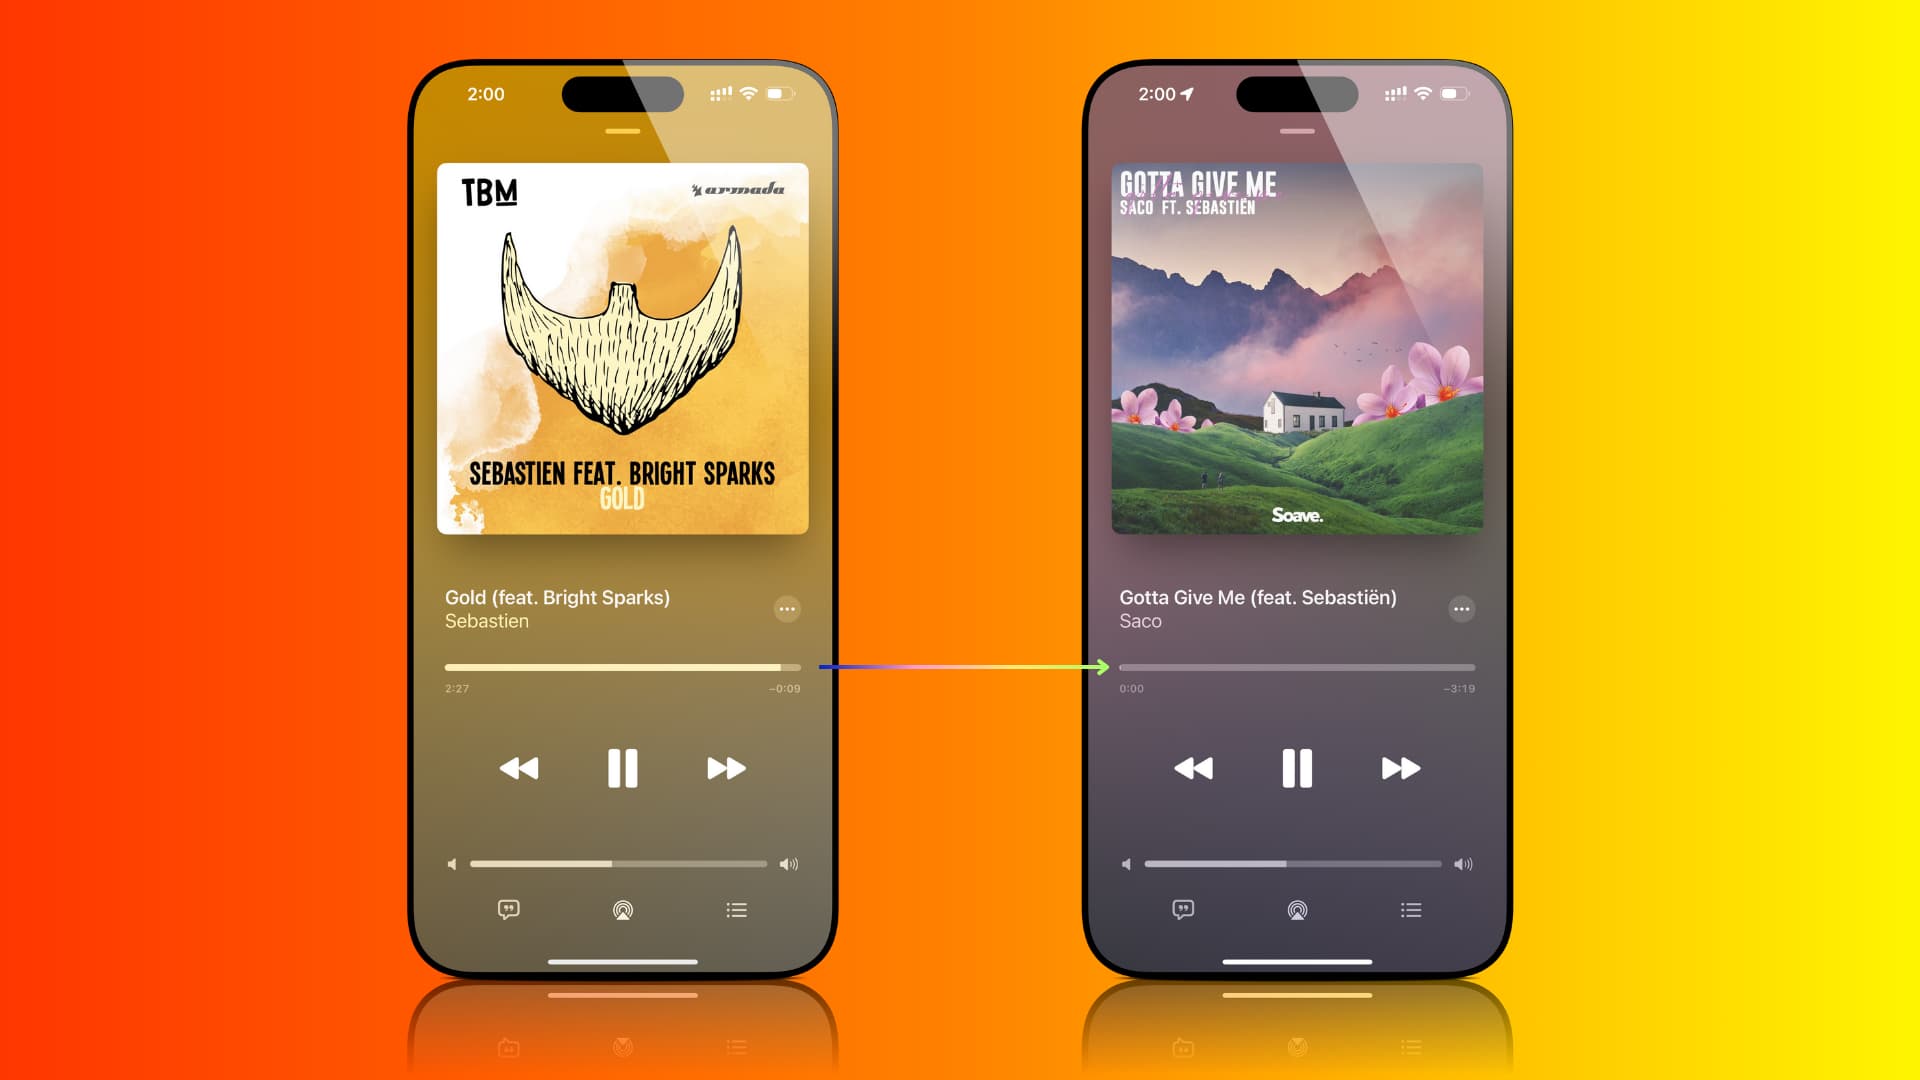 How to crossfade songs in Apple Music